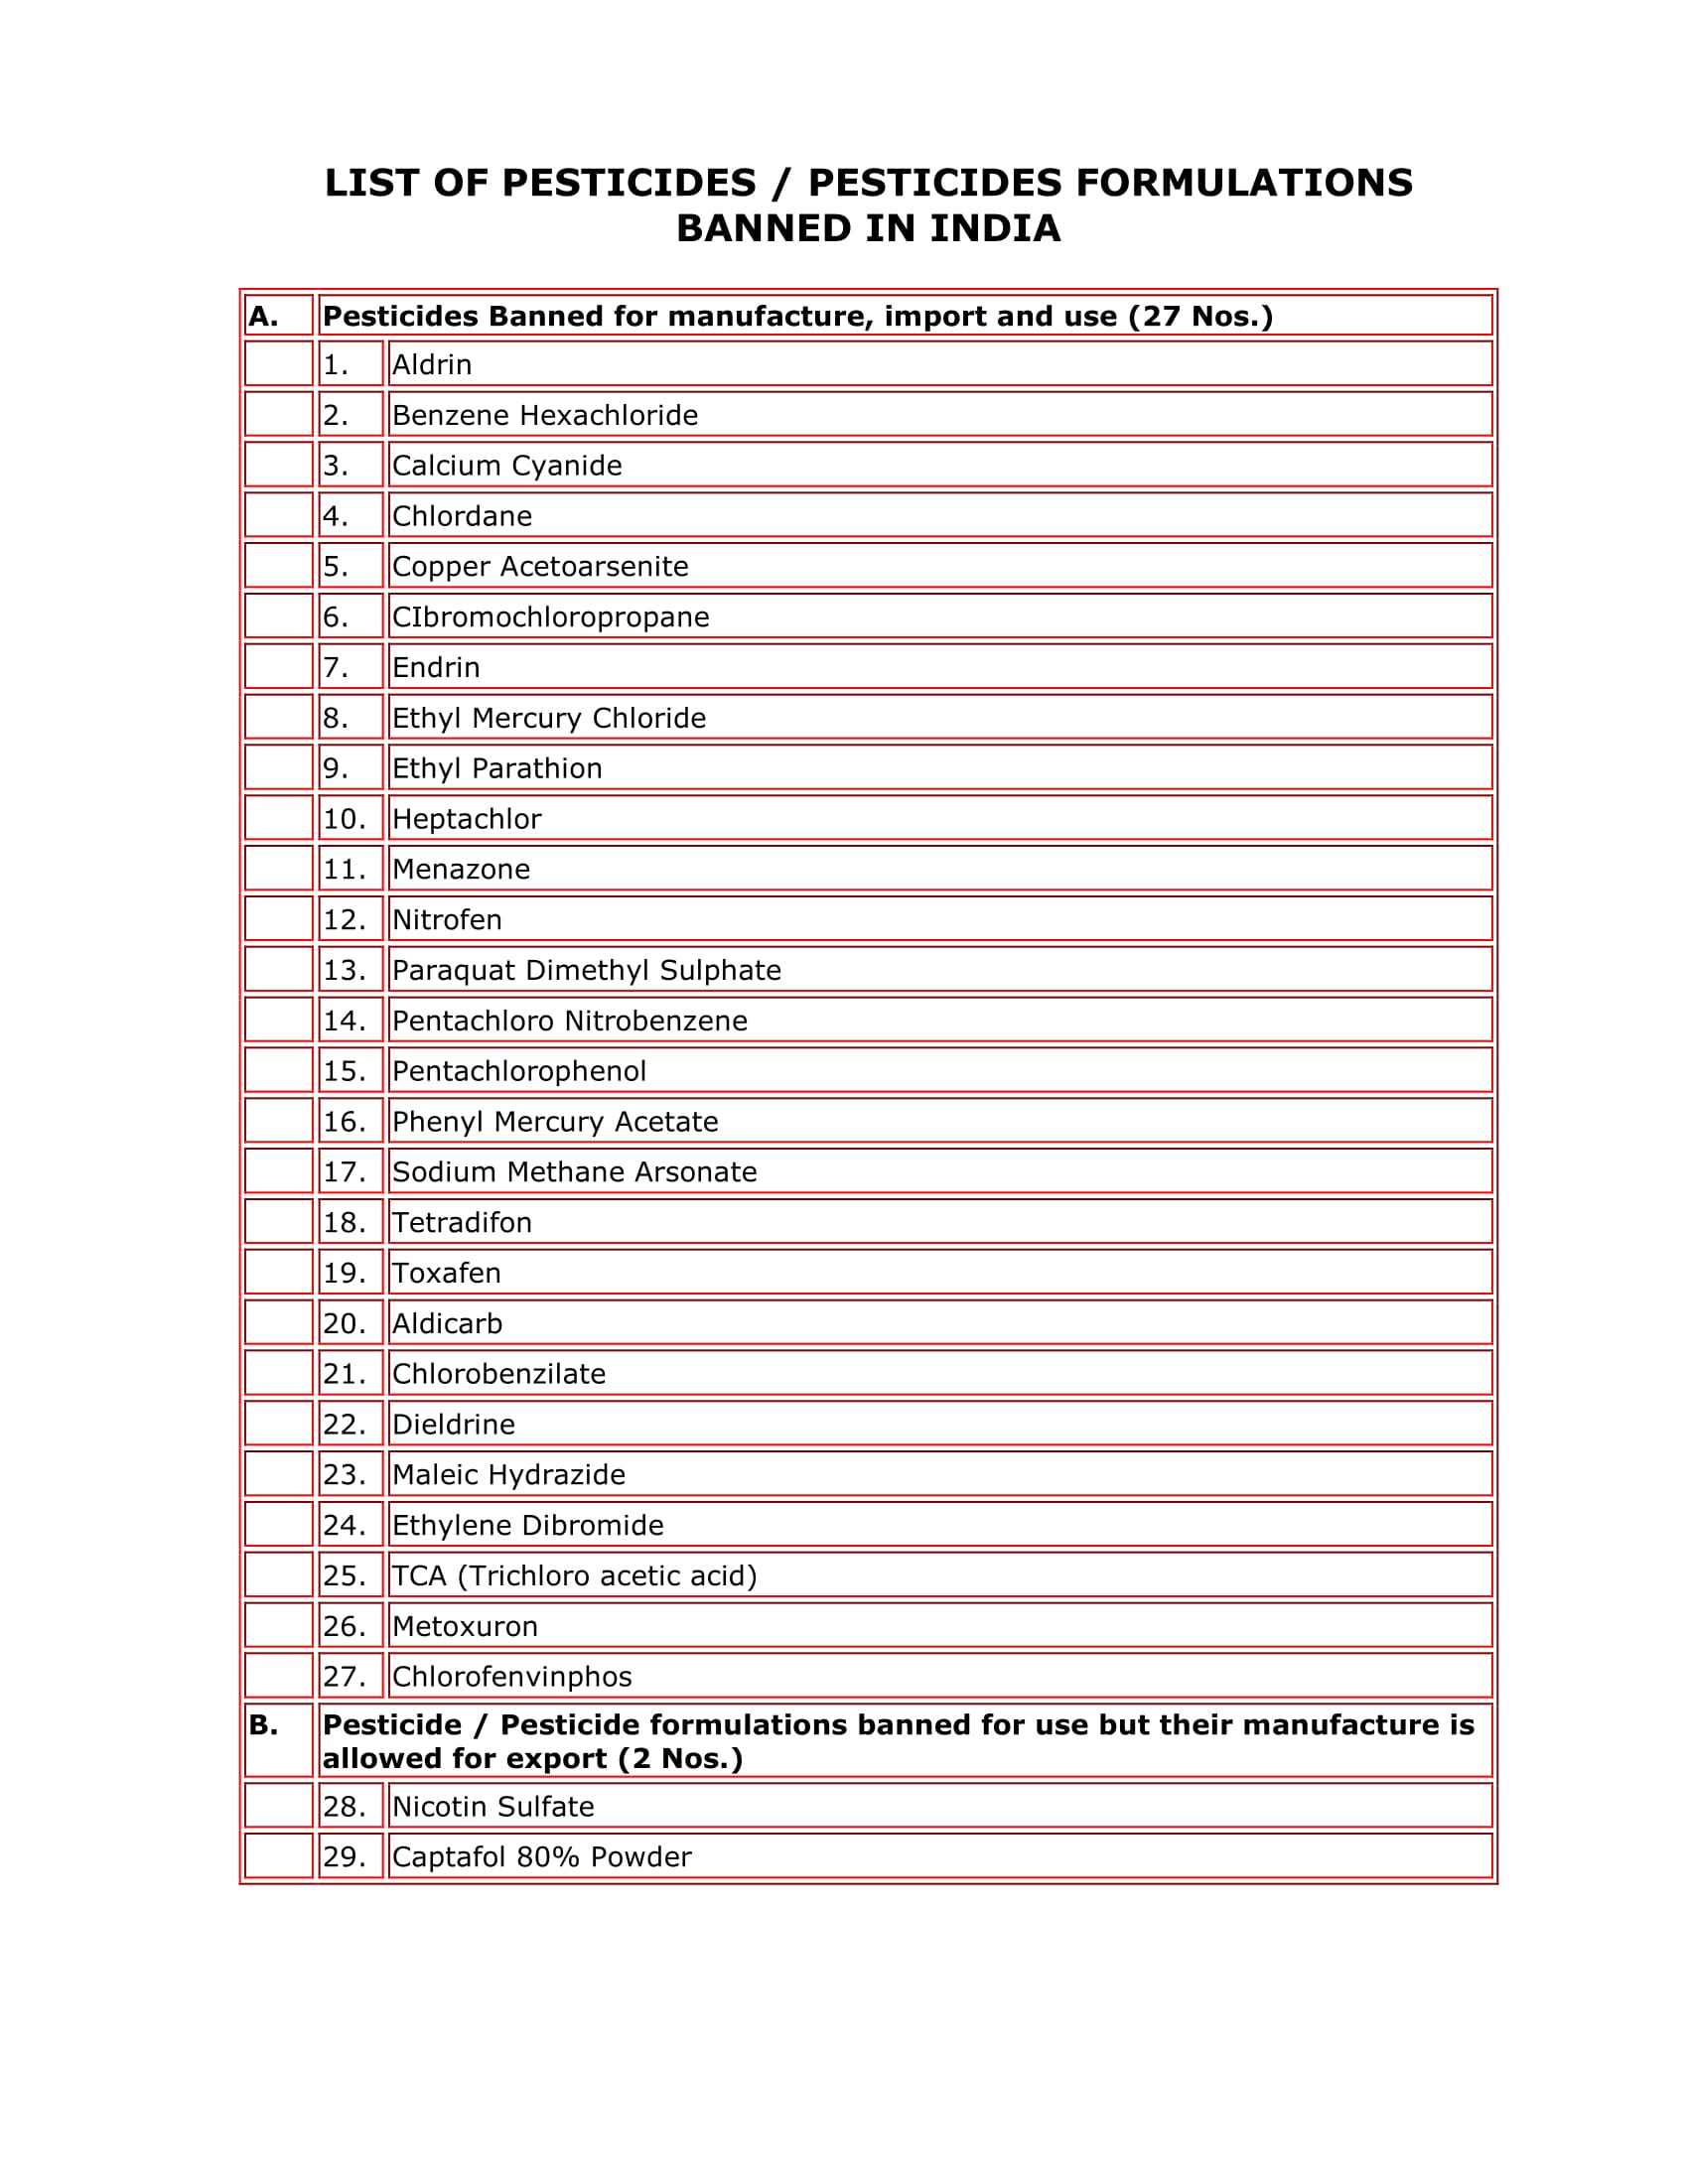 LIST OF BANNED PESTICIDES-1